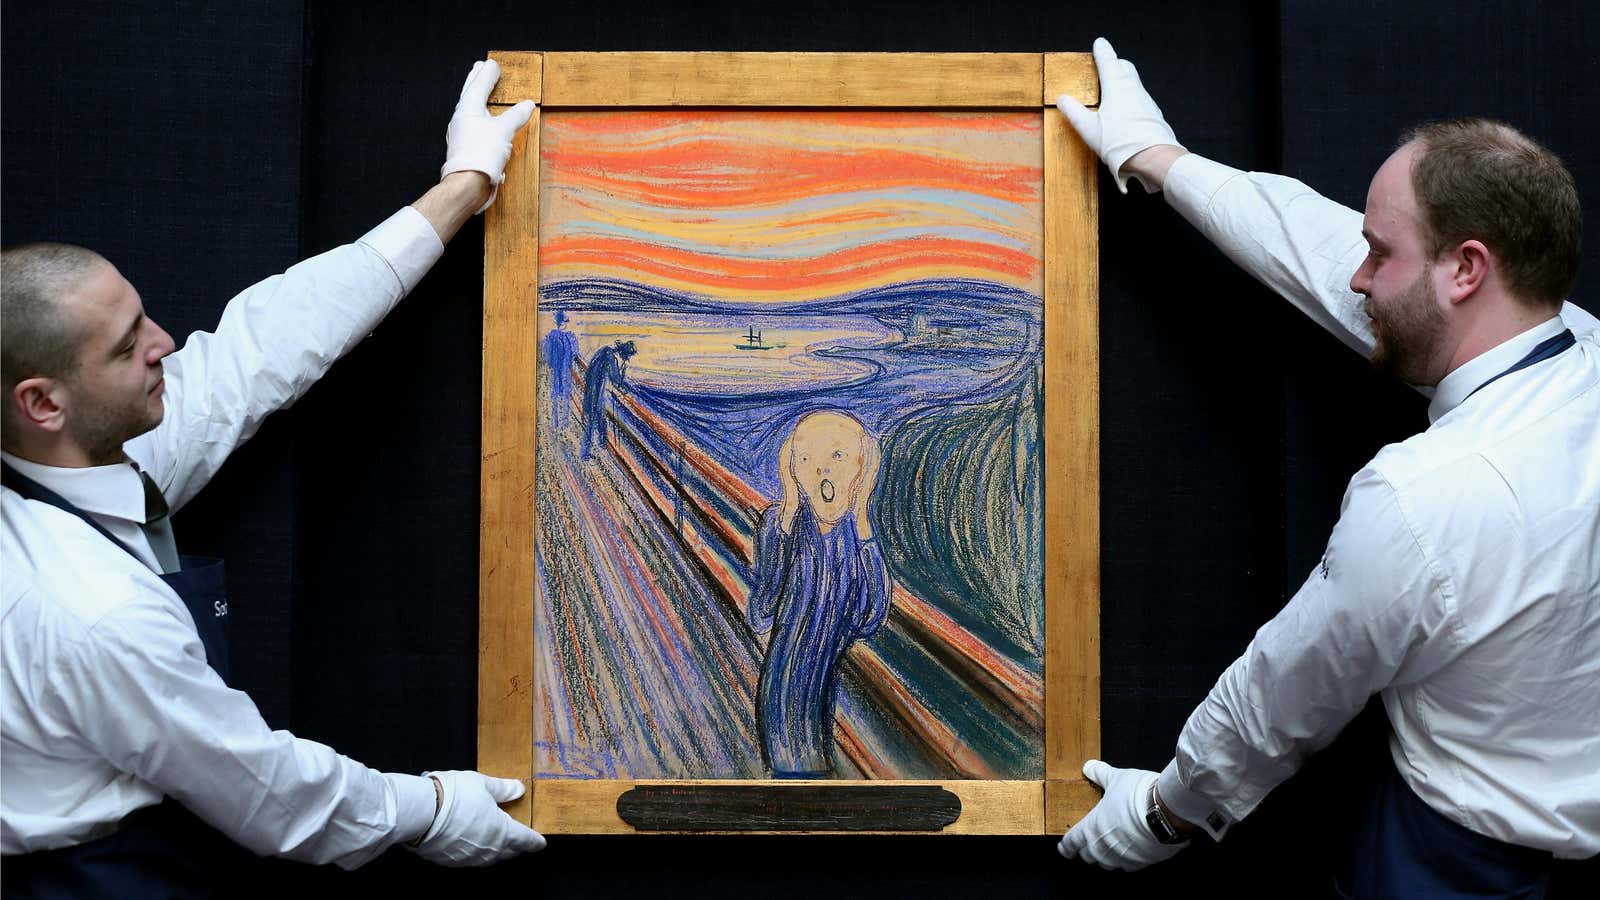 “The Scream” on display in Sotheby’s in London.